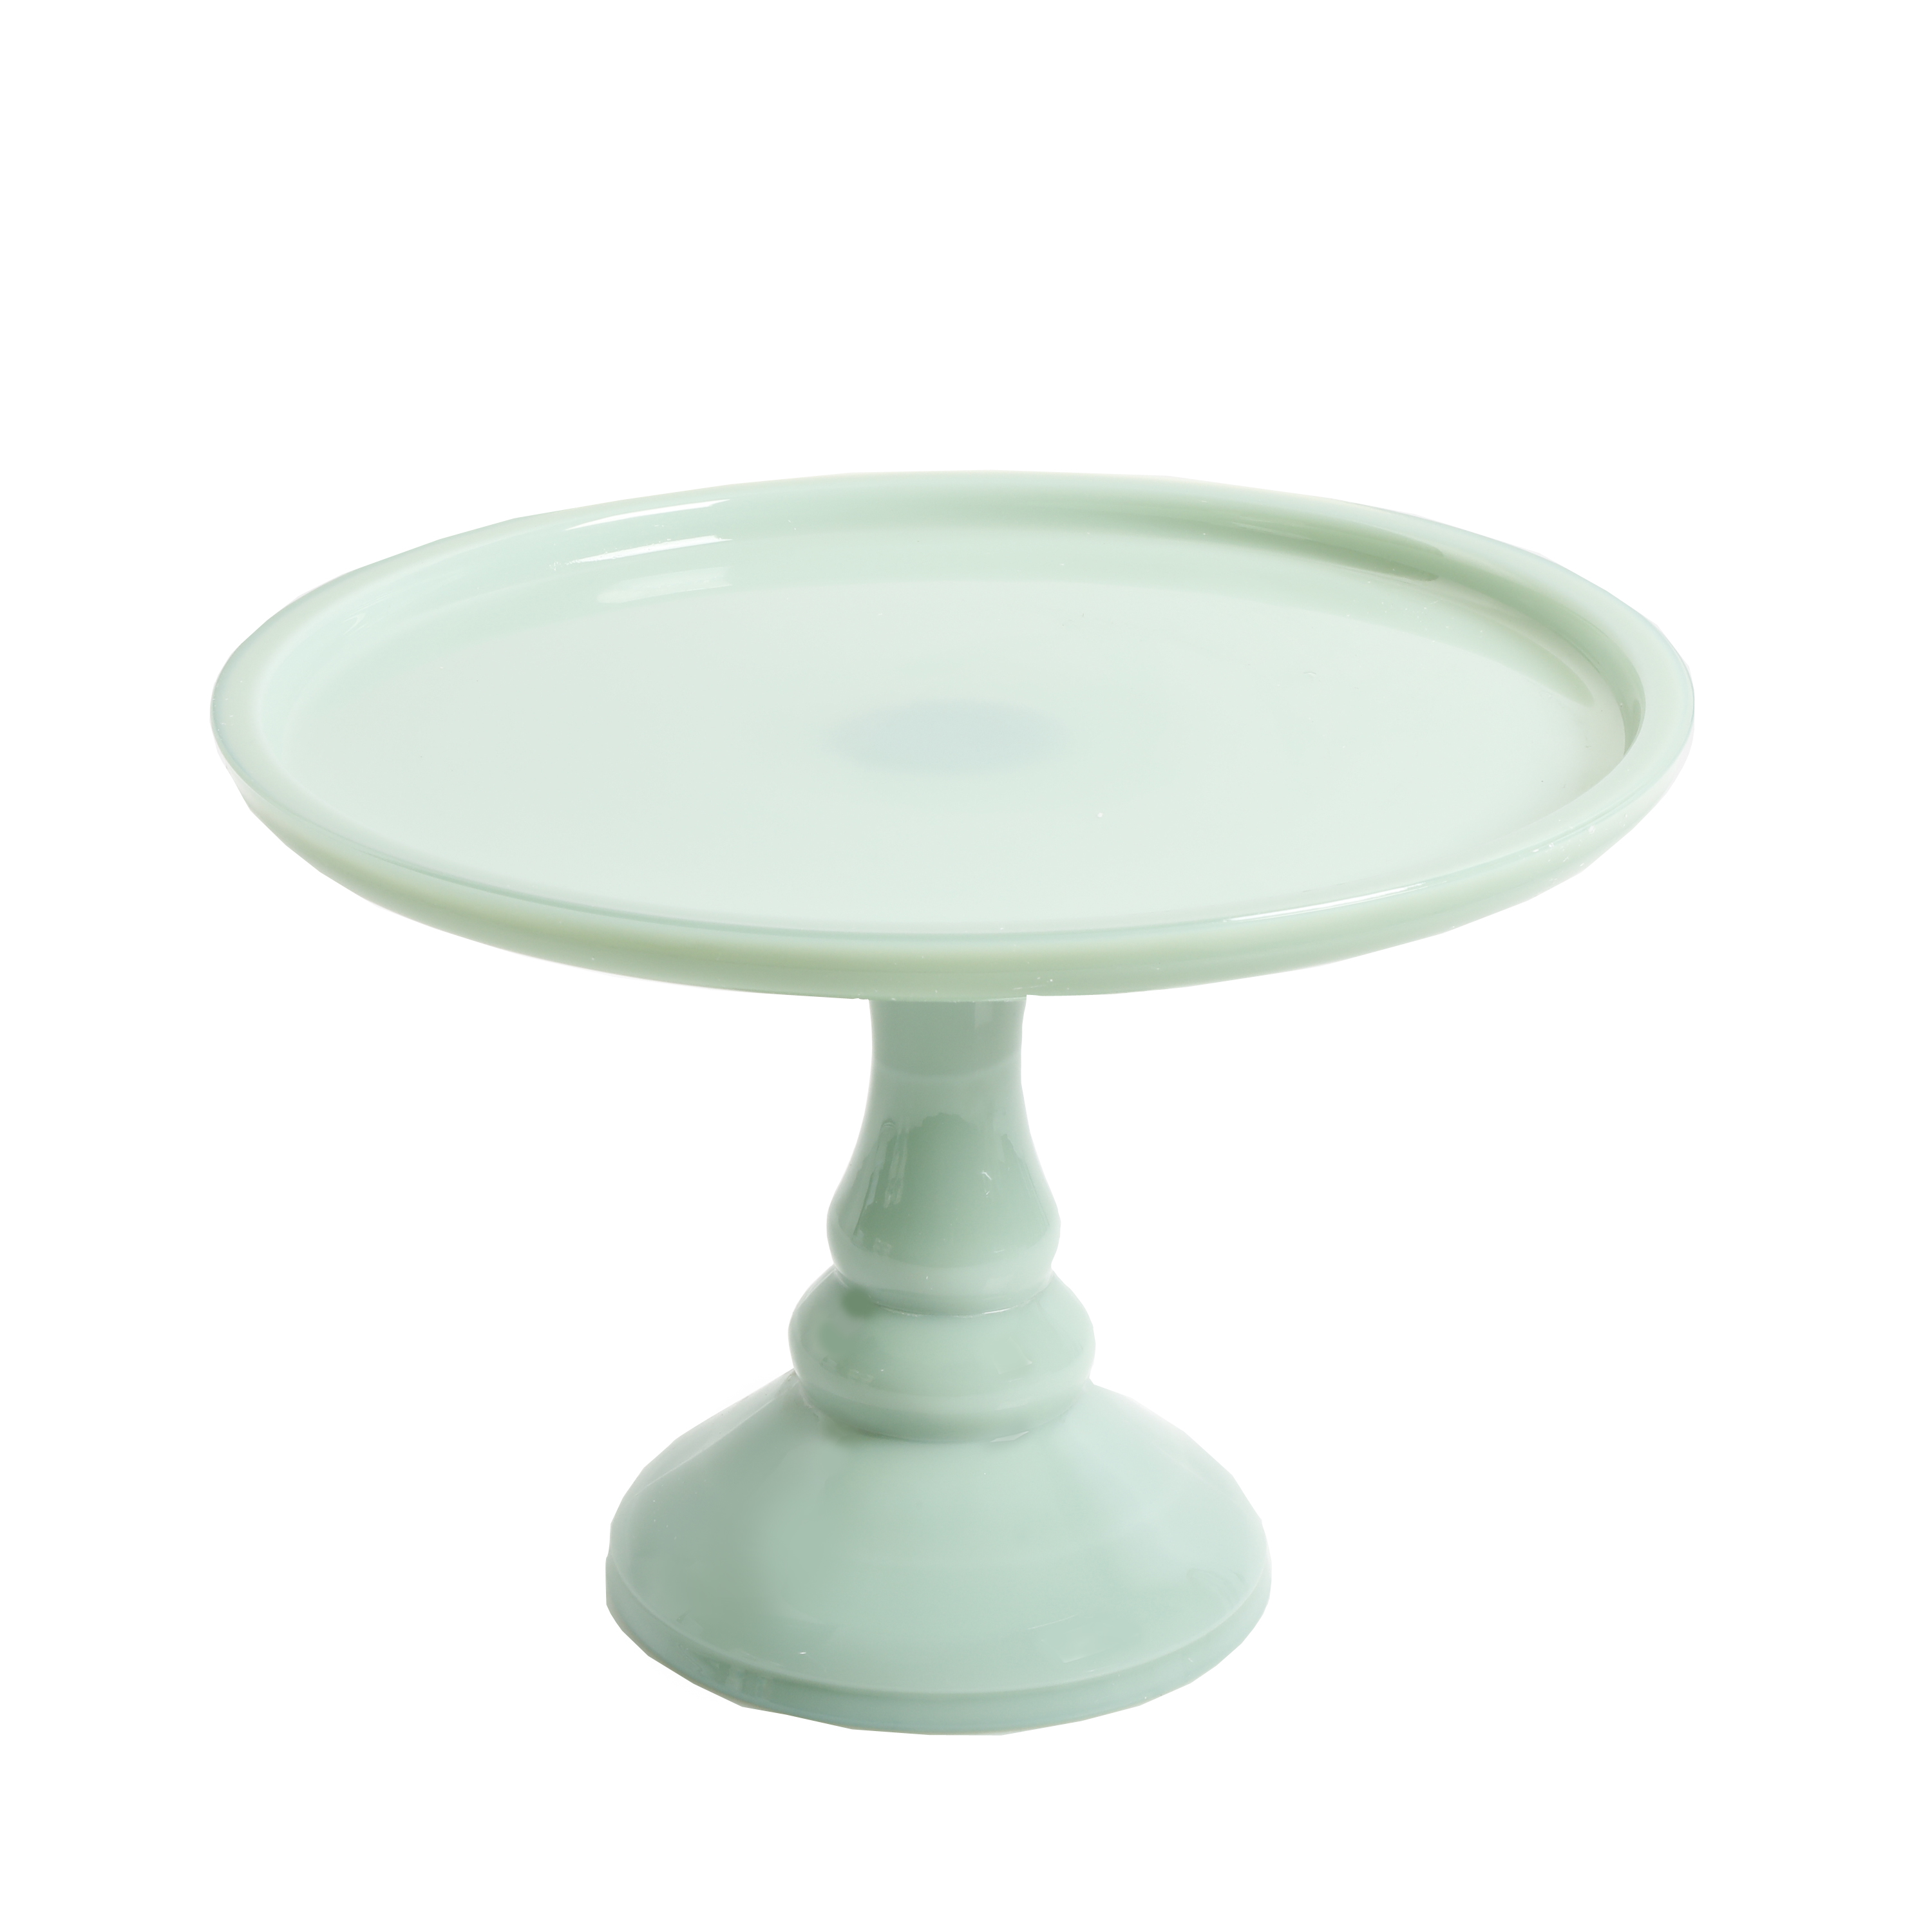 The Pioneer Woman Timeless Beauty 10-inch Cake Stand with Glass Cover, Mint Green - image 4 of 5